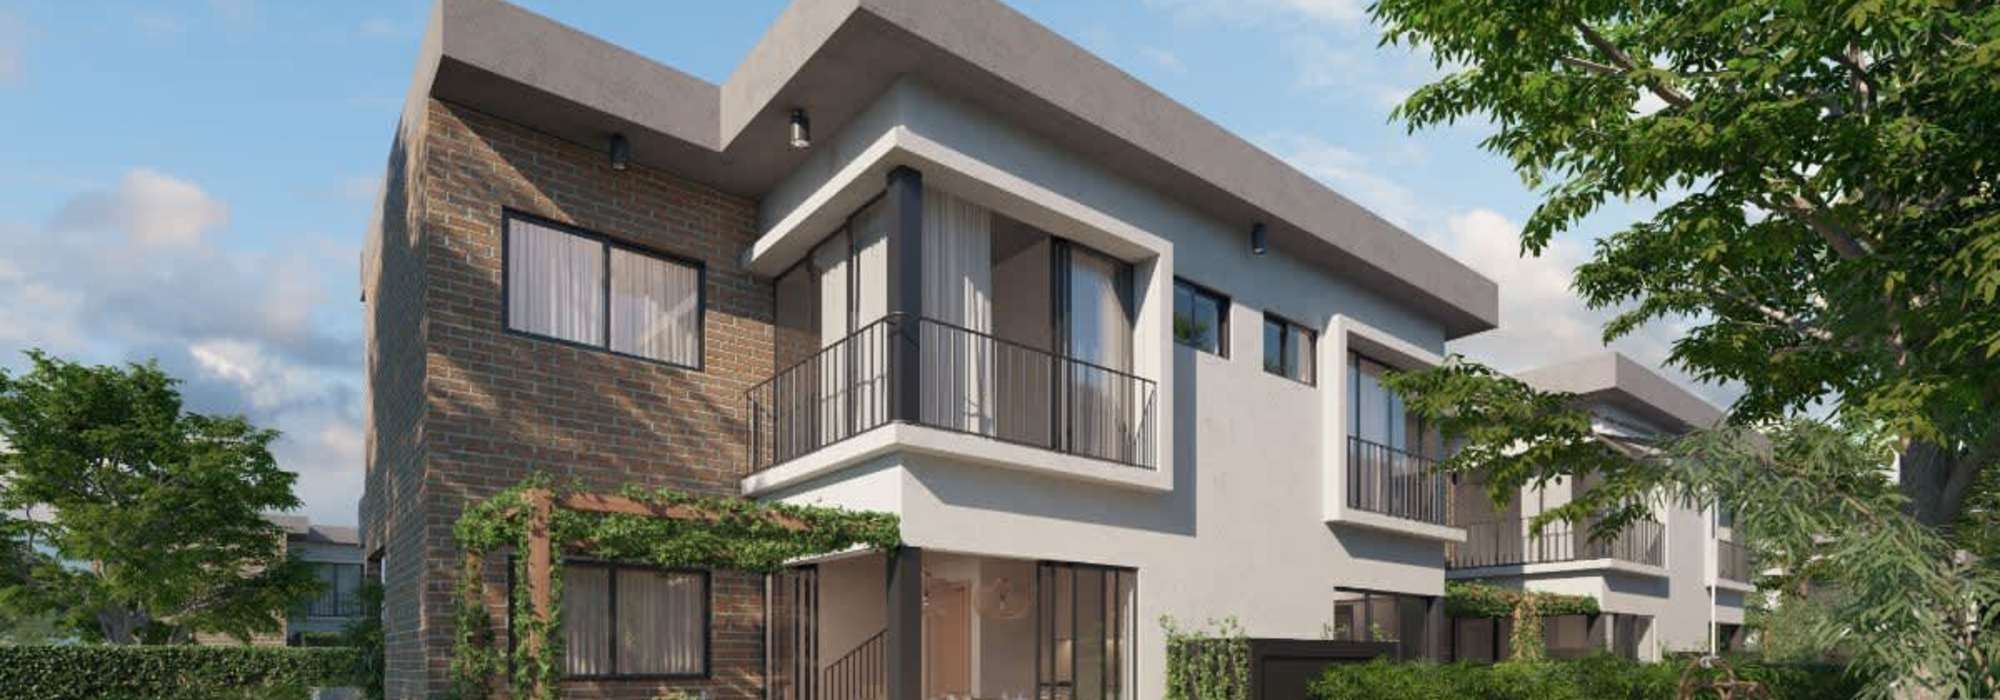 Townhouses are sold ideal for living or investing in Vista Cana